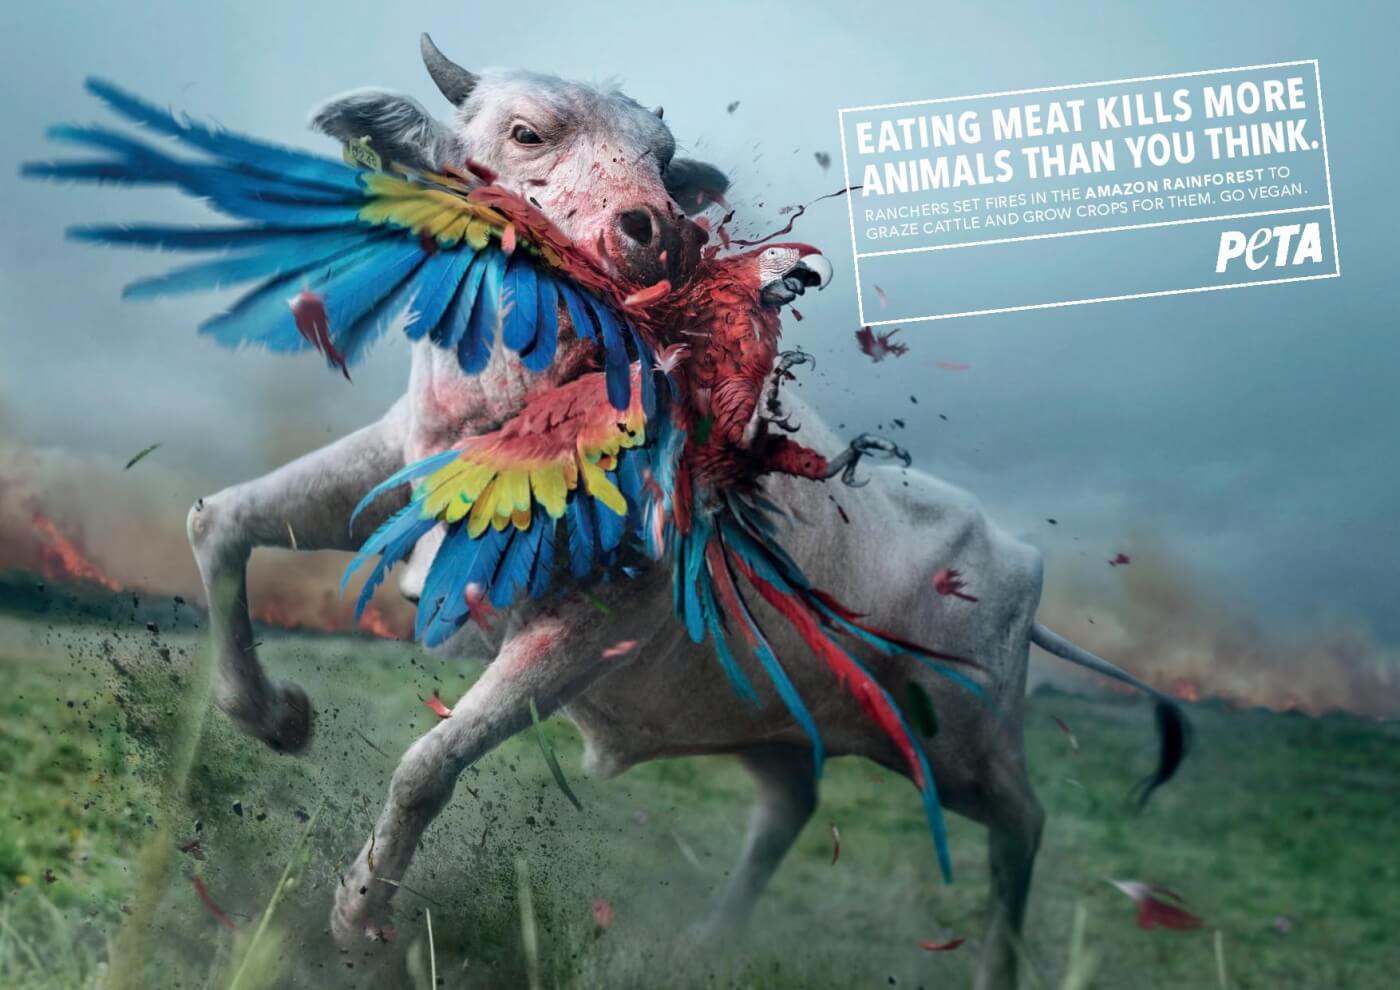 PETA’s New Ad Blames Meat-Eaters for Amazon Fires